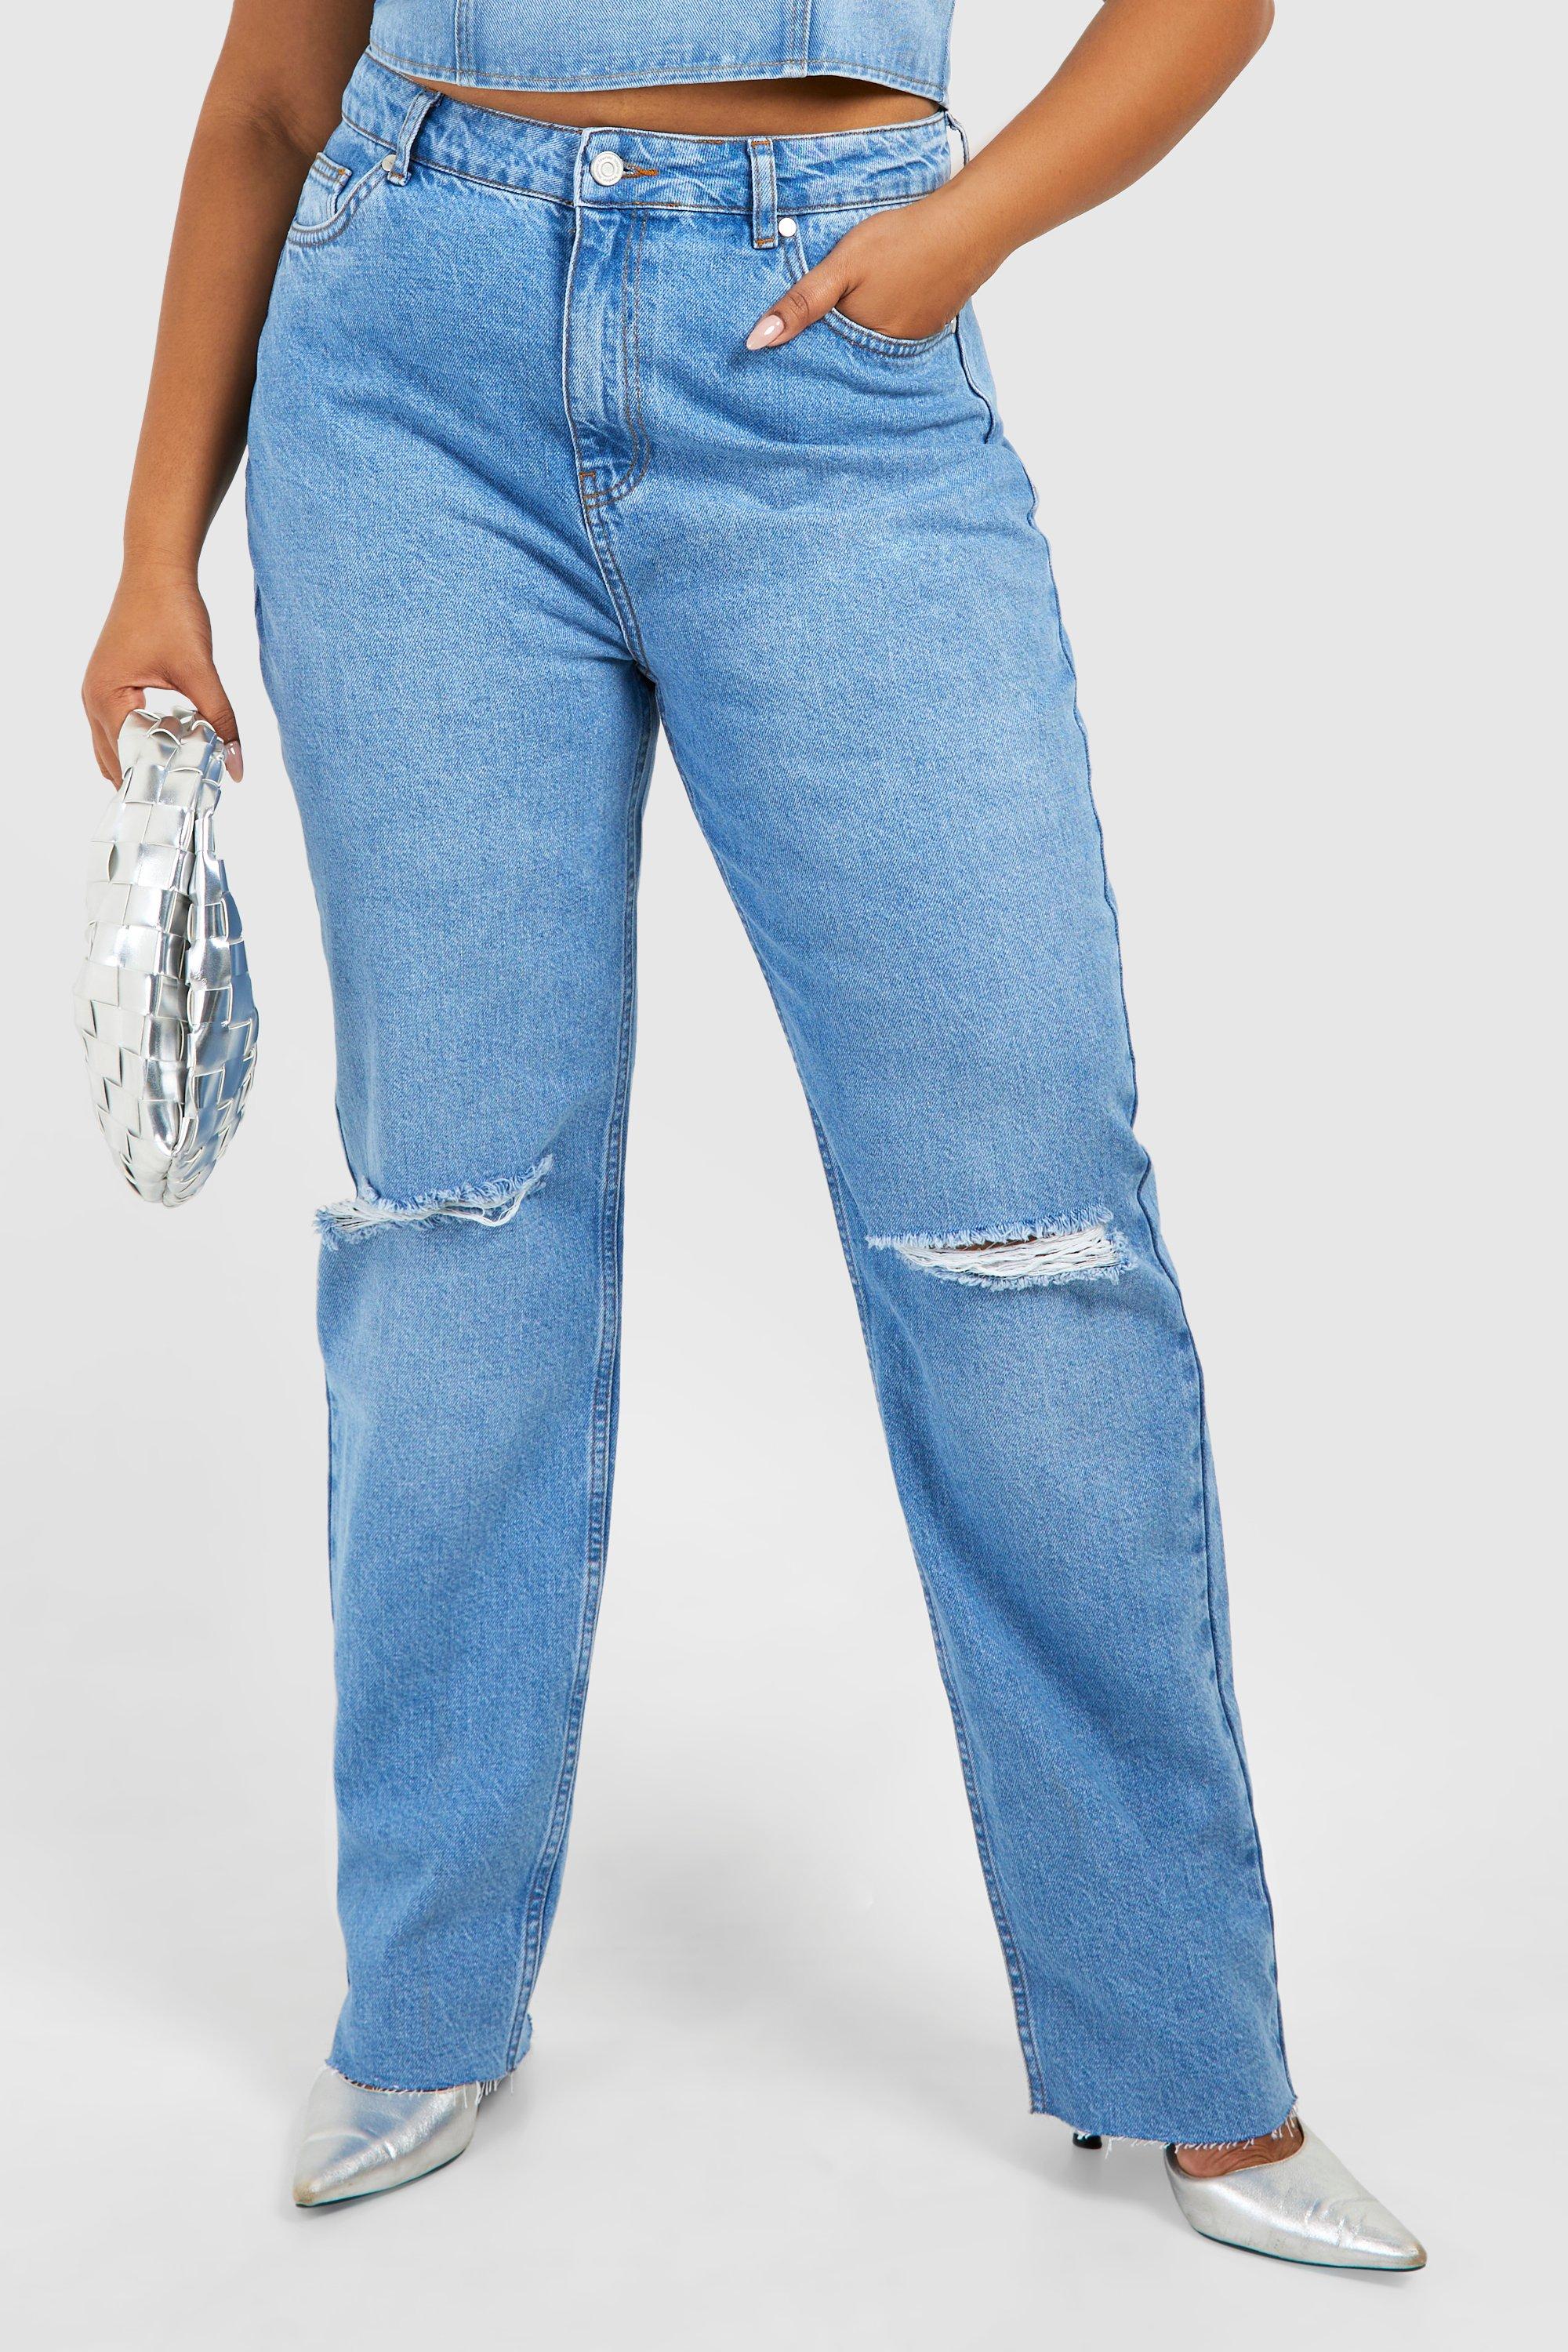 Women's Light Blue Jeans, Ripped, Mom & Flared